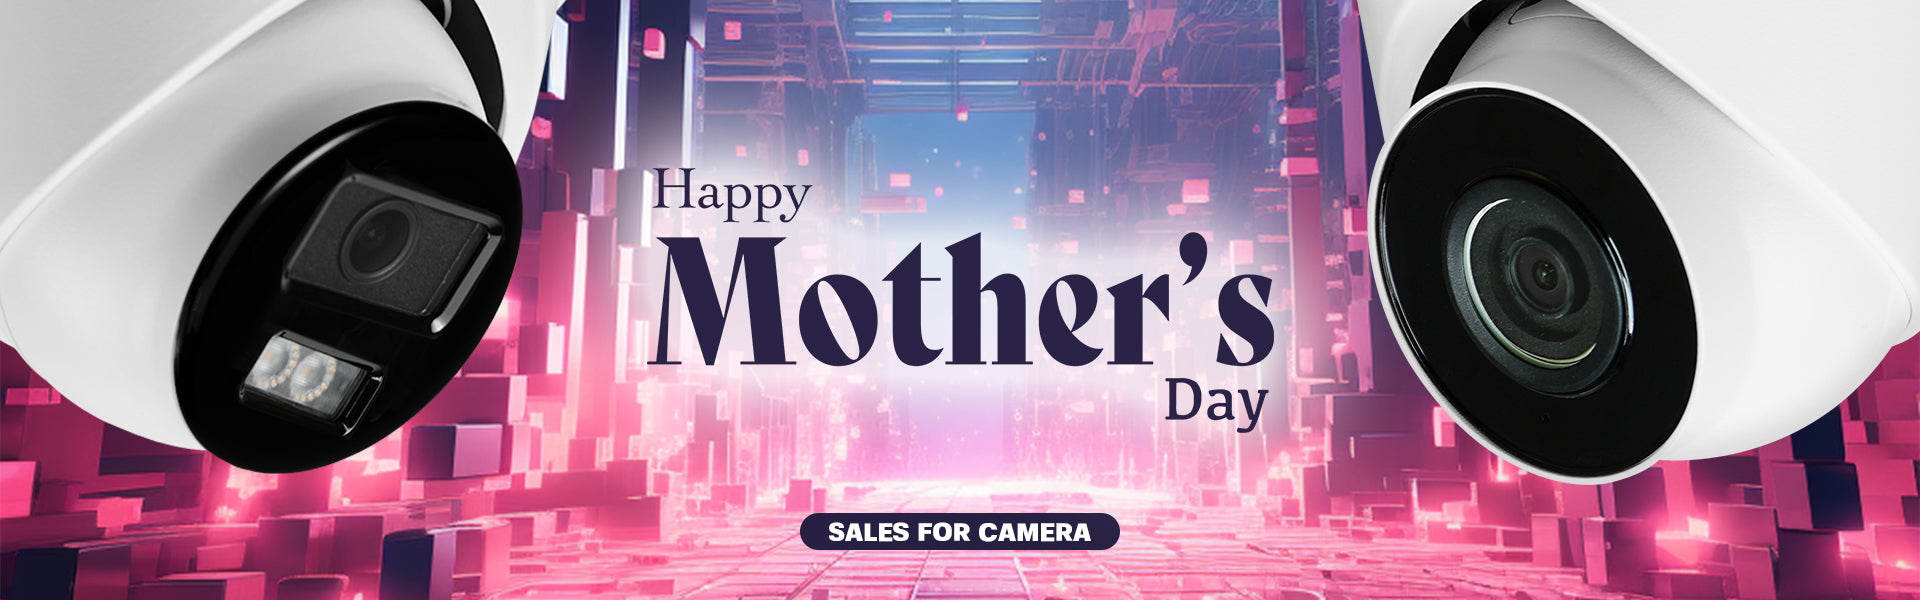 Camera Sale - Mother's Day